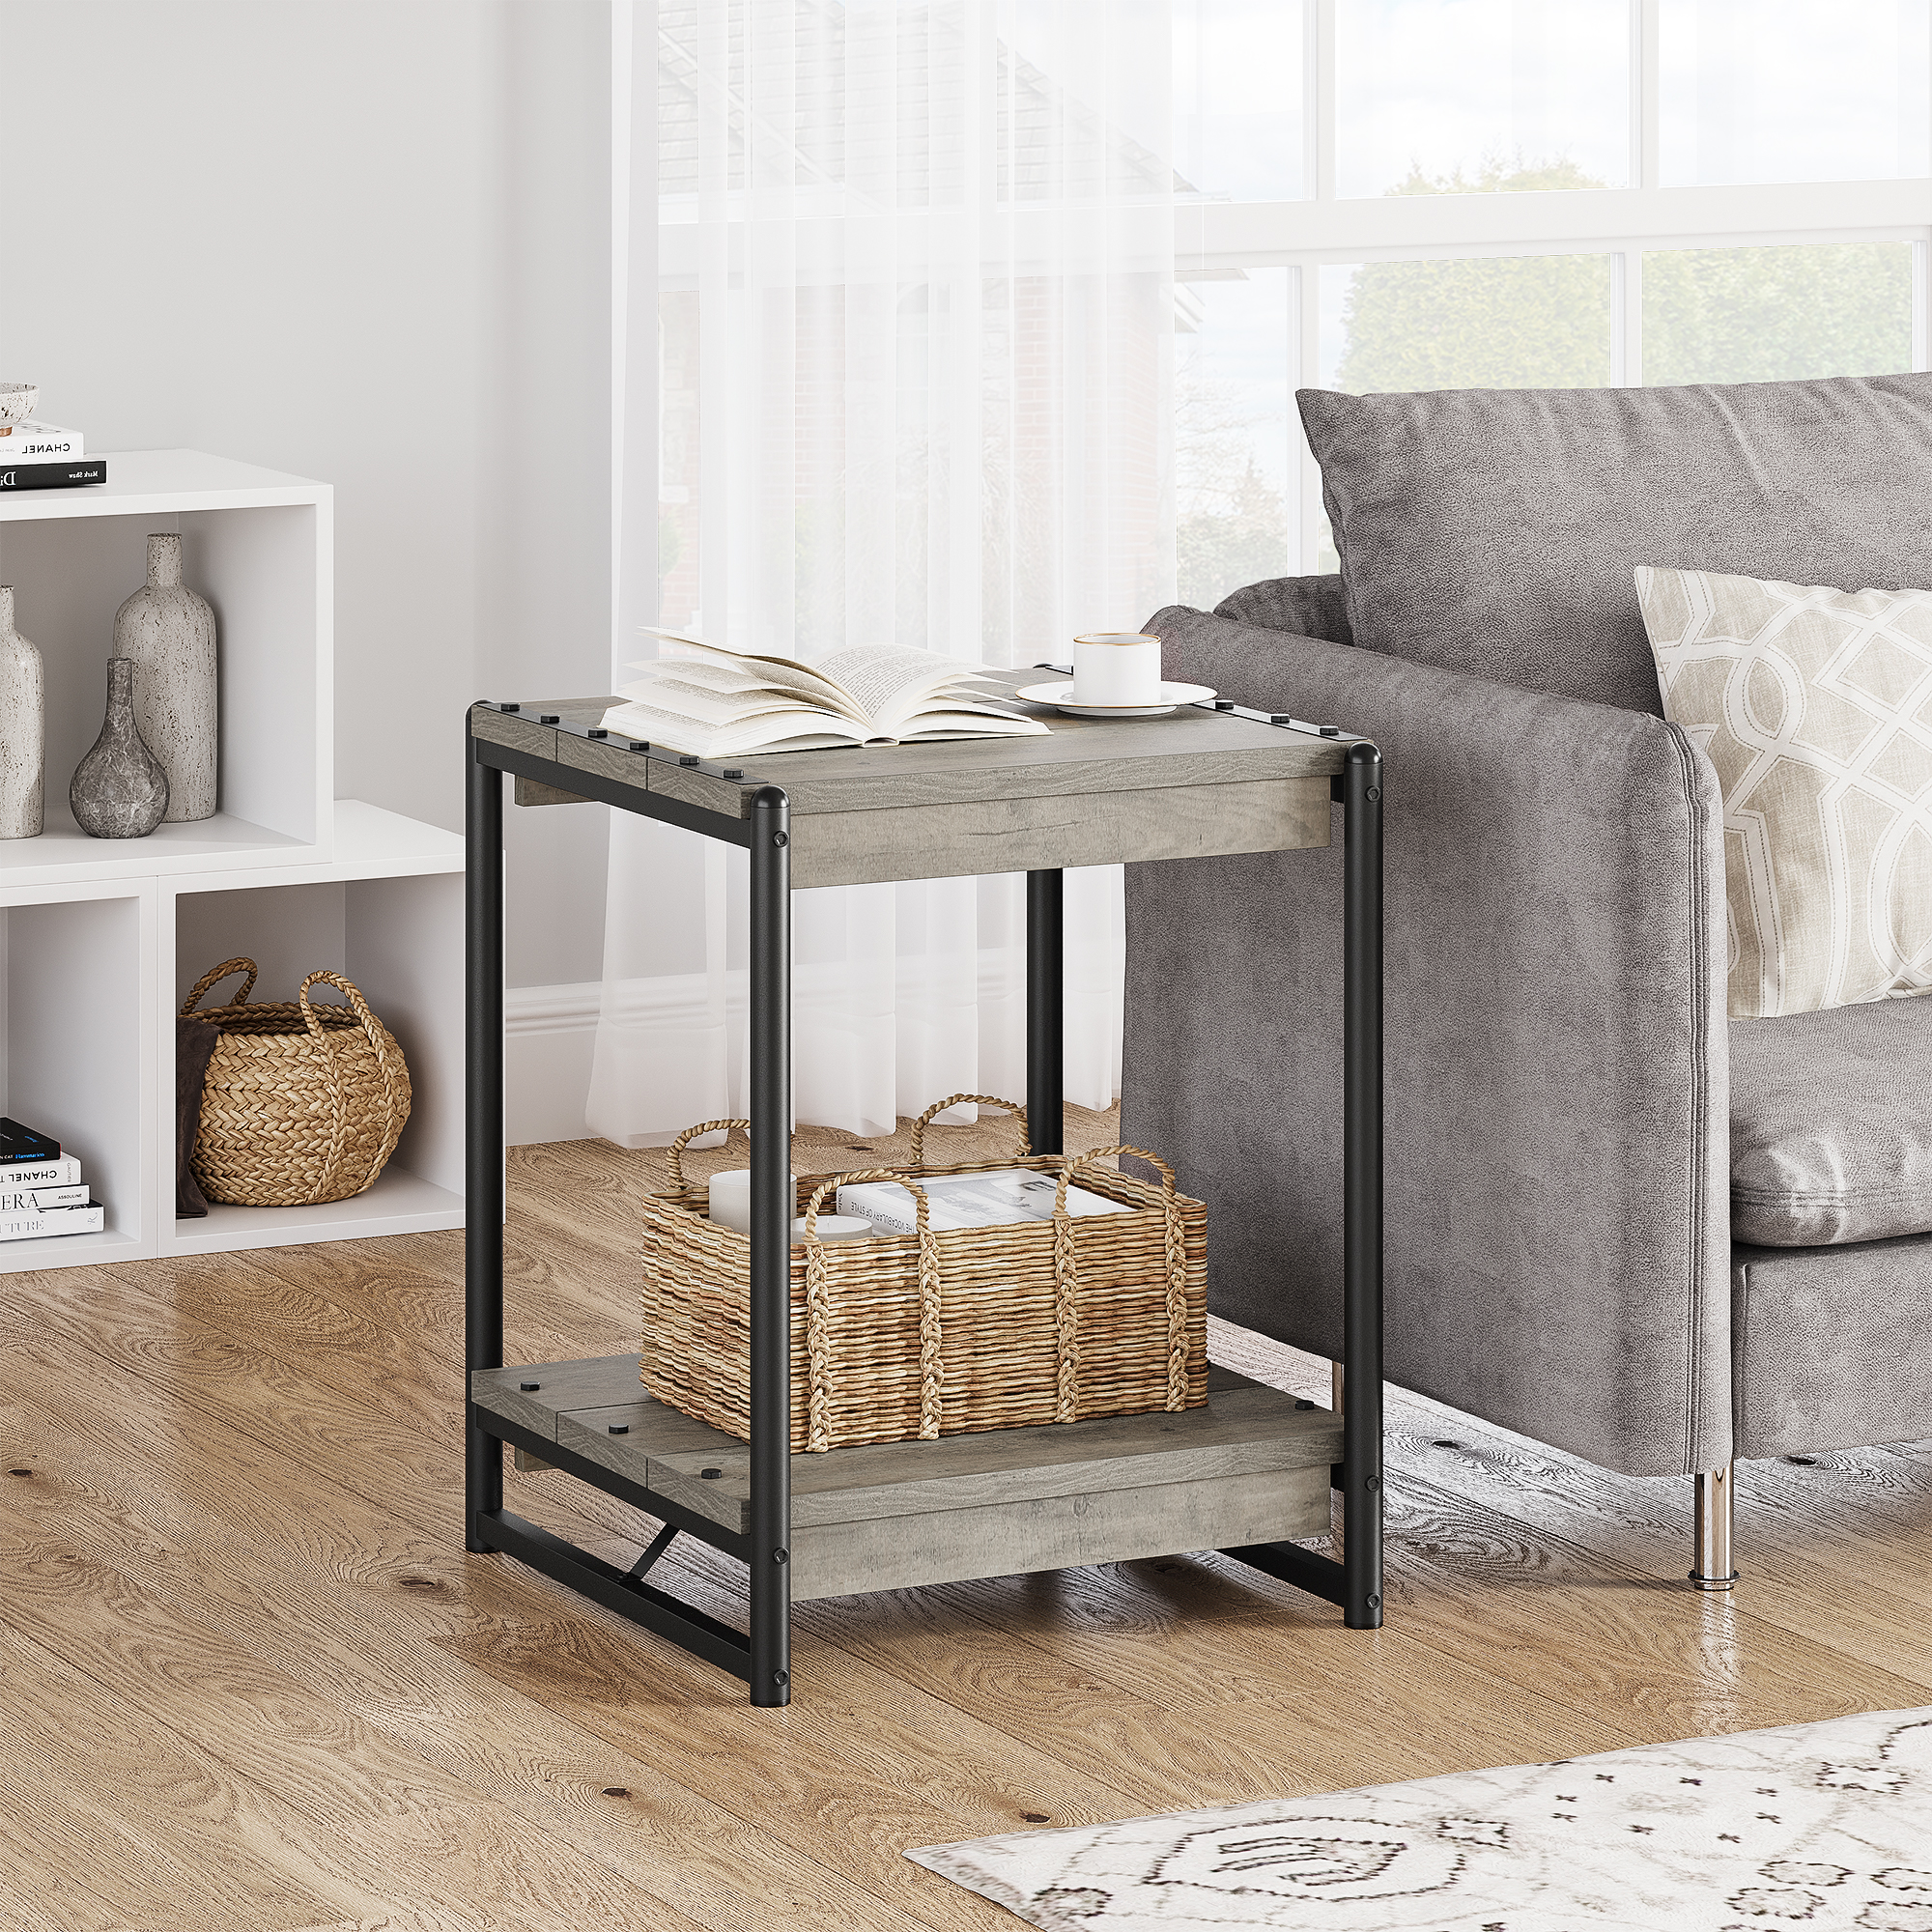 Fashionwu Wood End Table, Industrial Side Table with Storage Shelf, Easy Assemble 19.6 Square End Table with Sturdy Frame, Nightstand Table for Small Spaces, Living Room, Bedroom, Grey - image 2 of 9